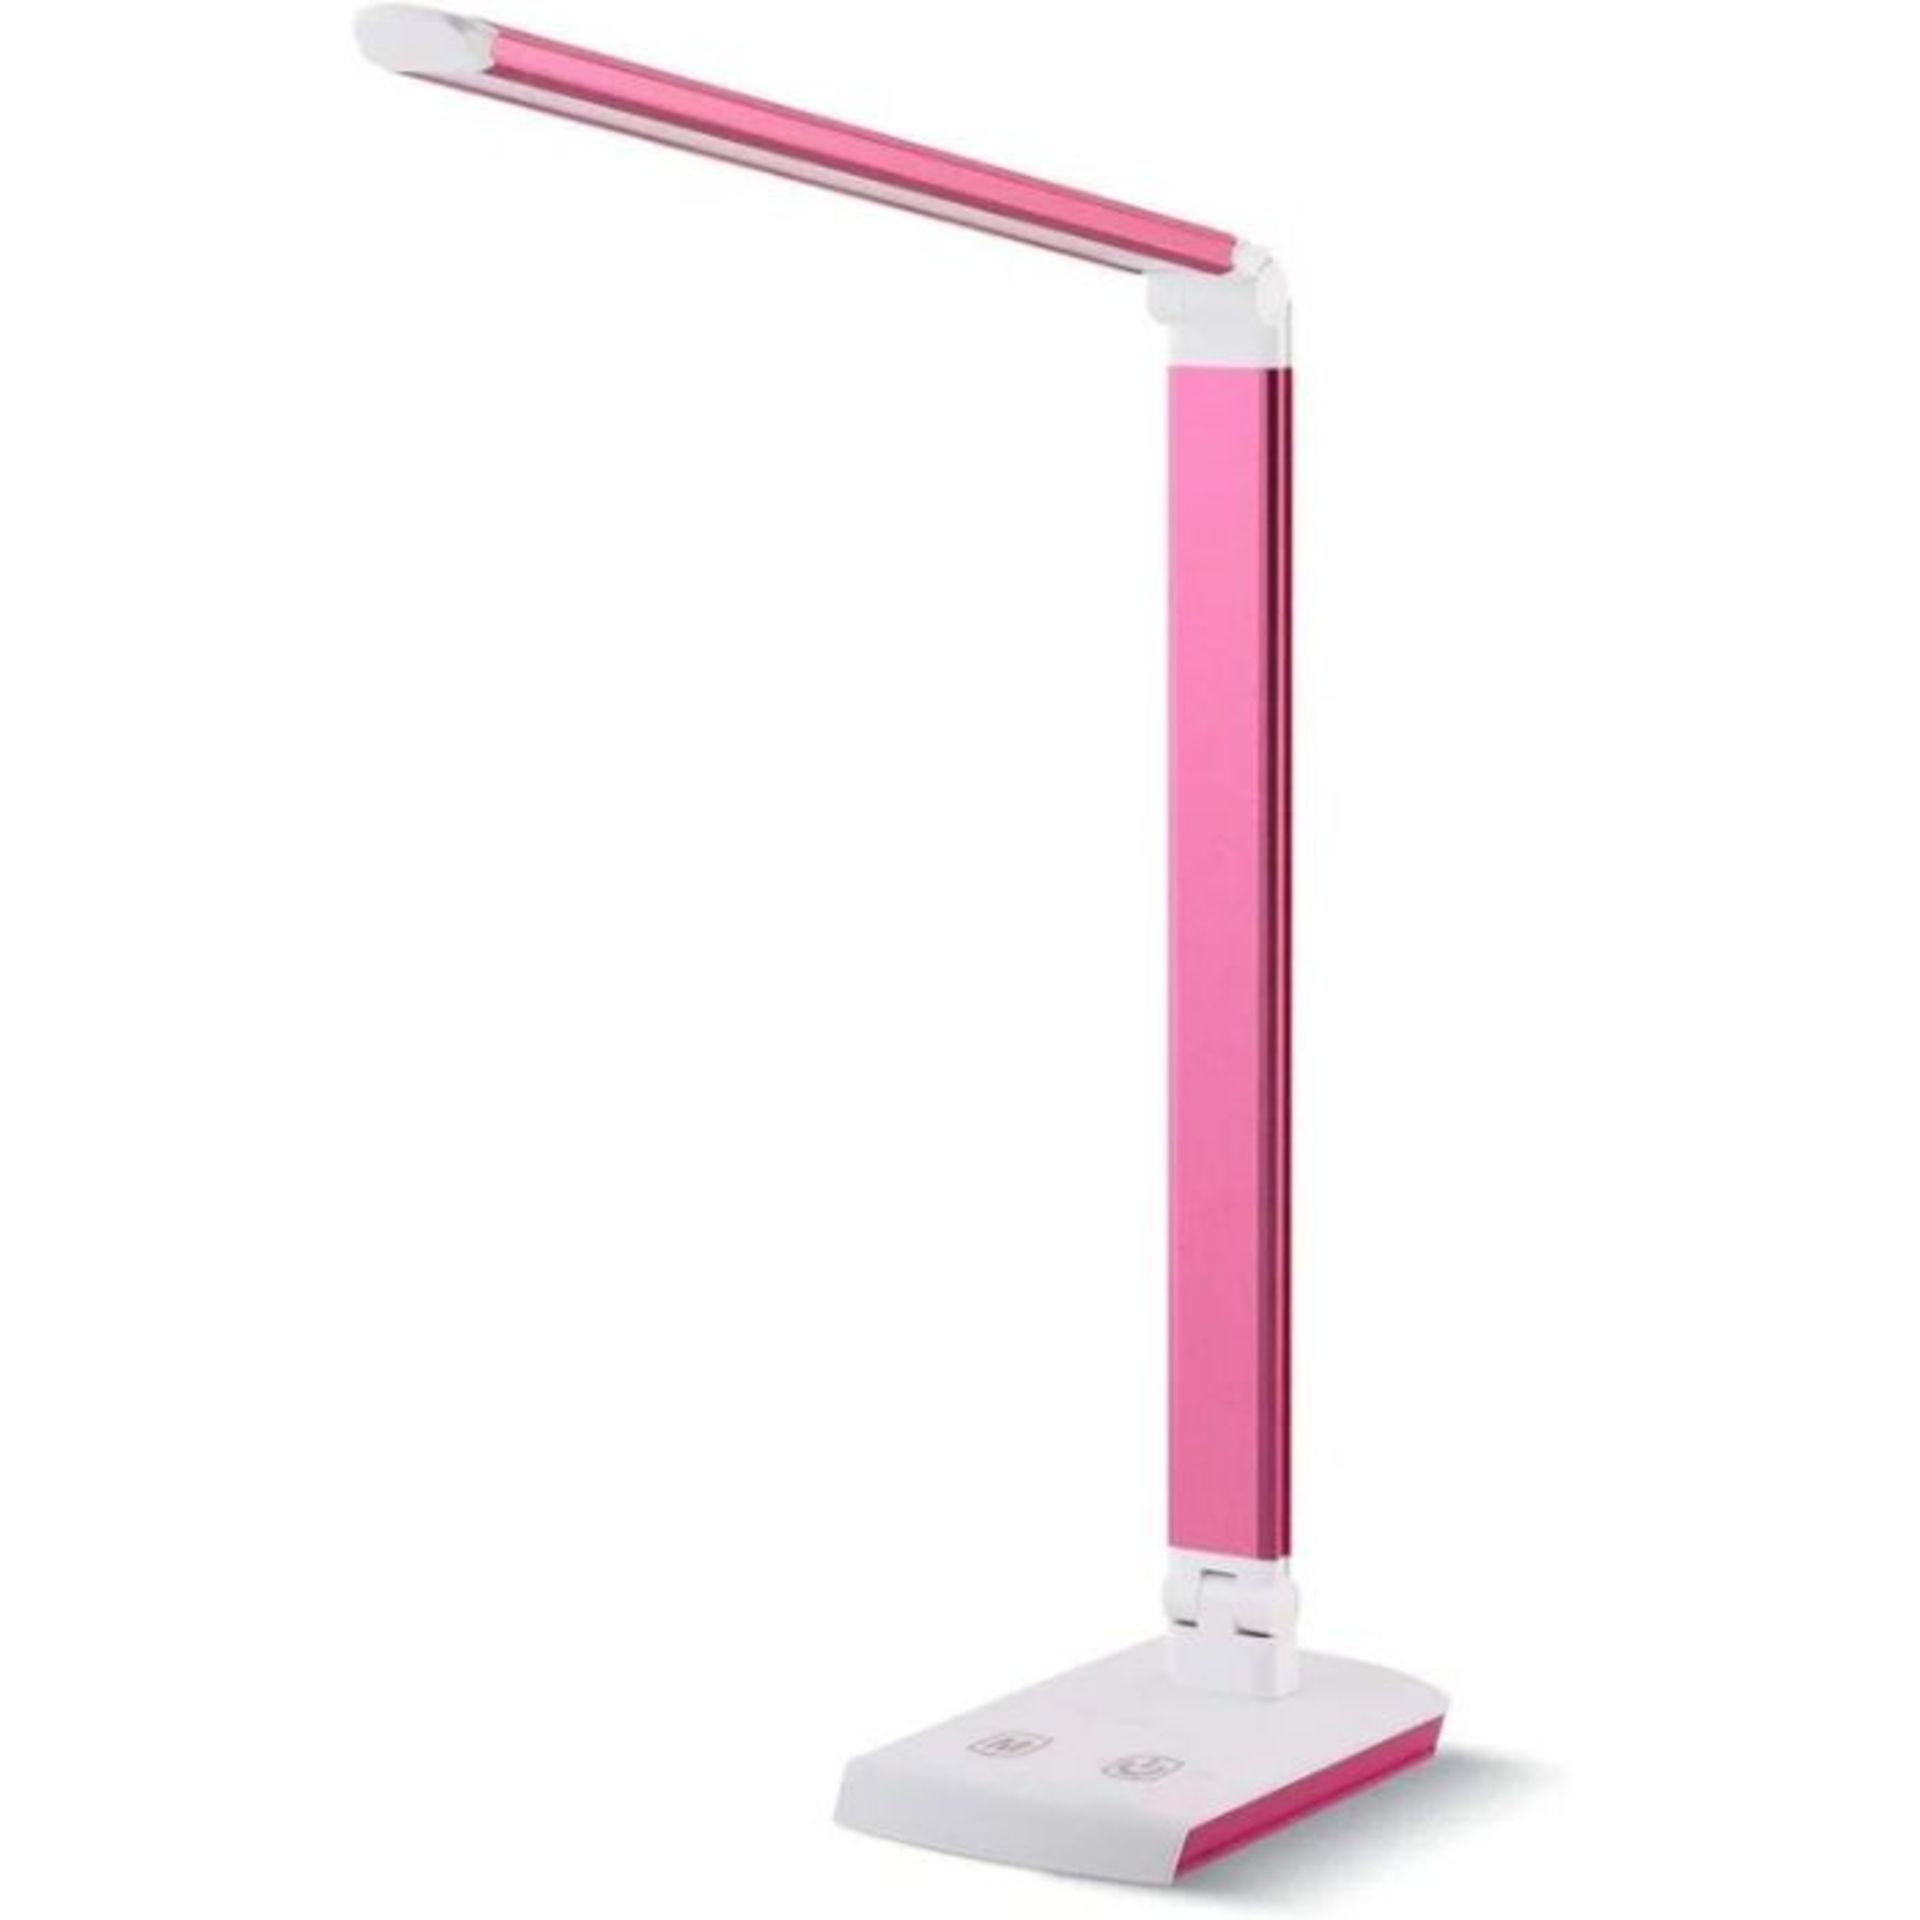 Ivy Bronx, Led Desk Lamp, 10 W Dimmable With 3 Light Modes Adjustable Angle Touch Control (PINK ROSE